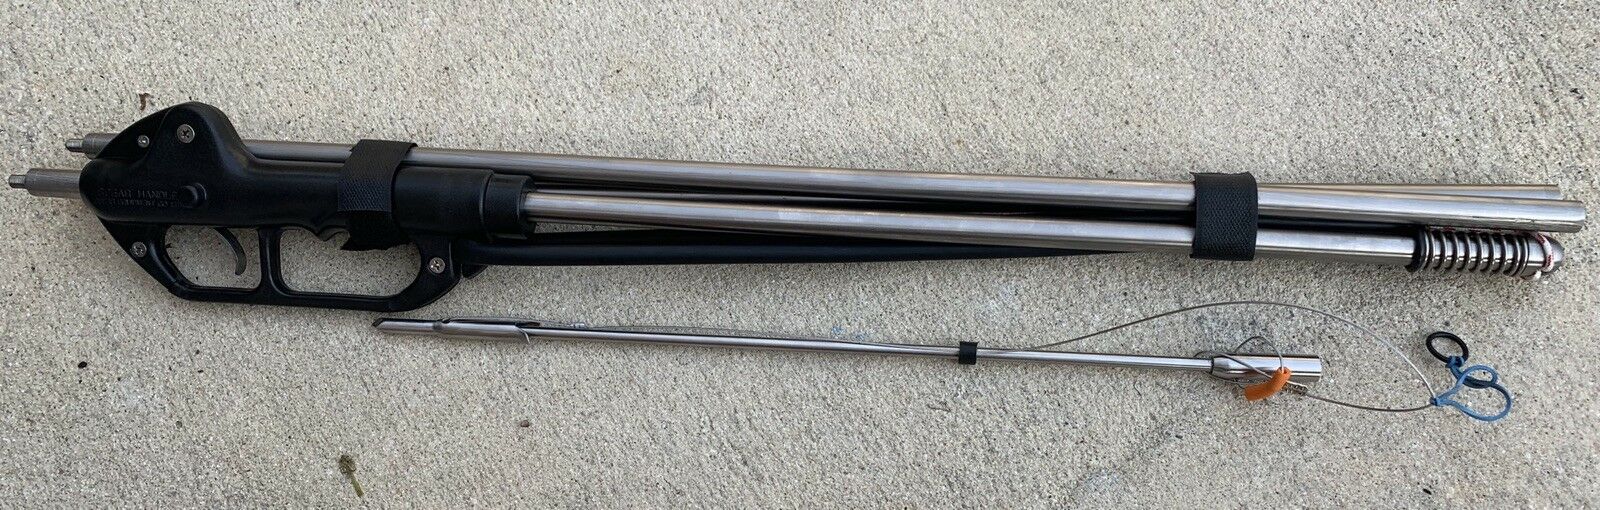 Lightweight collapsible speargun for international traveling? Or